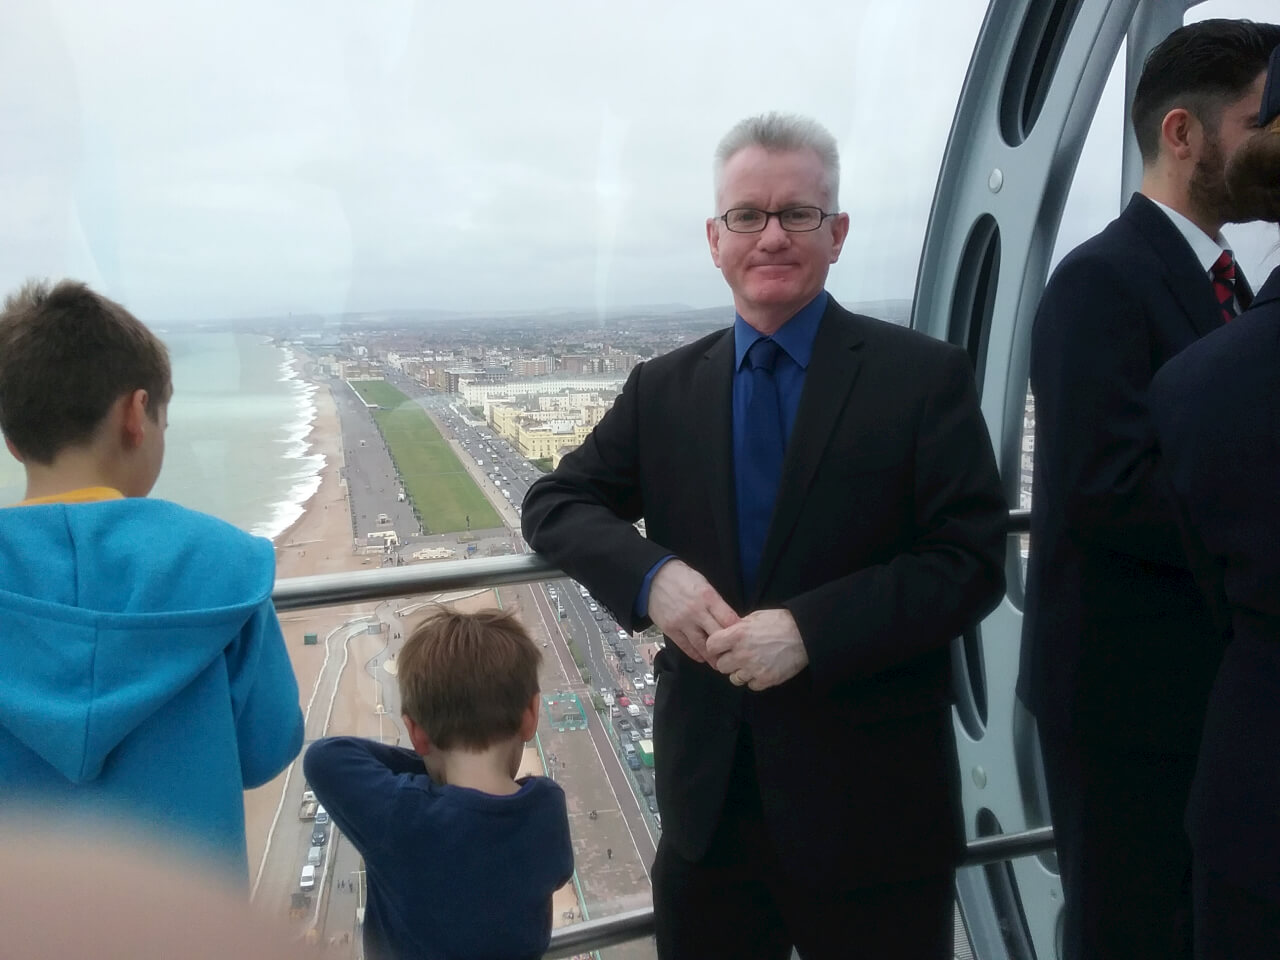 Martin in the pod of the British Airways i360